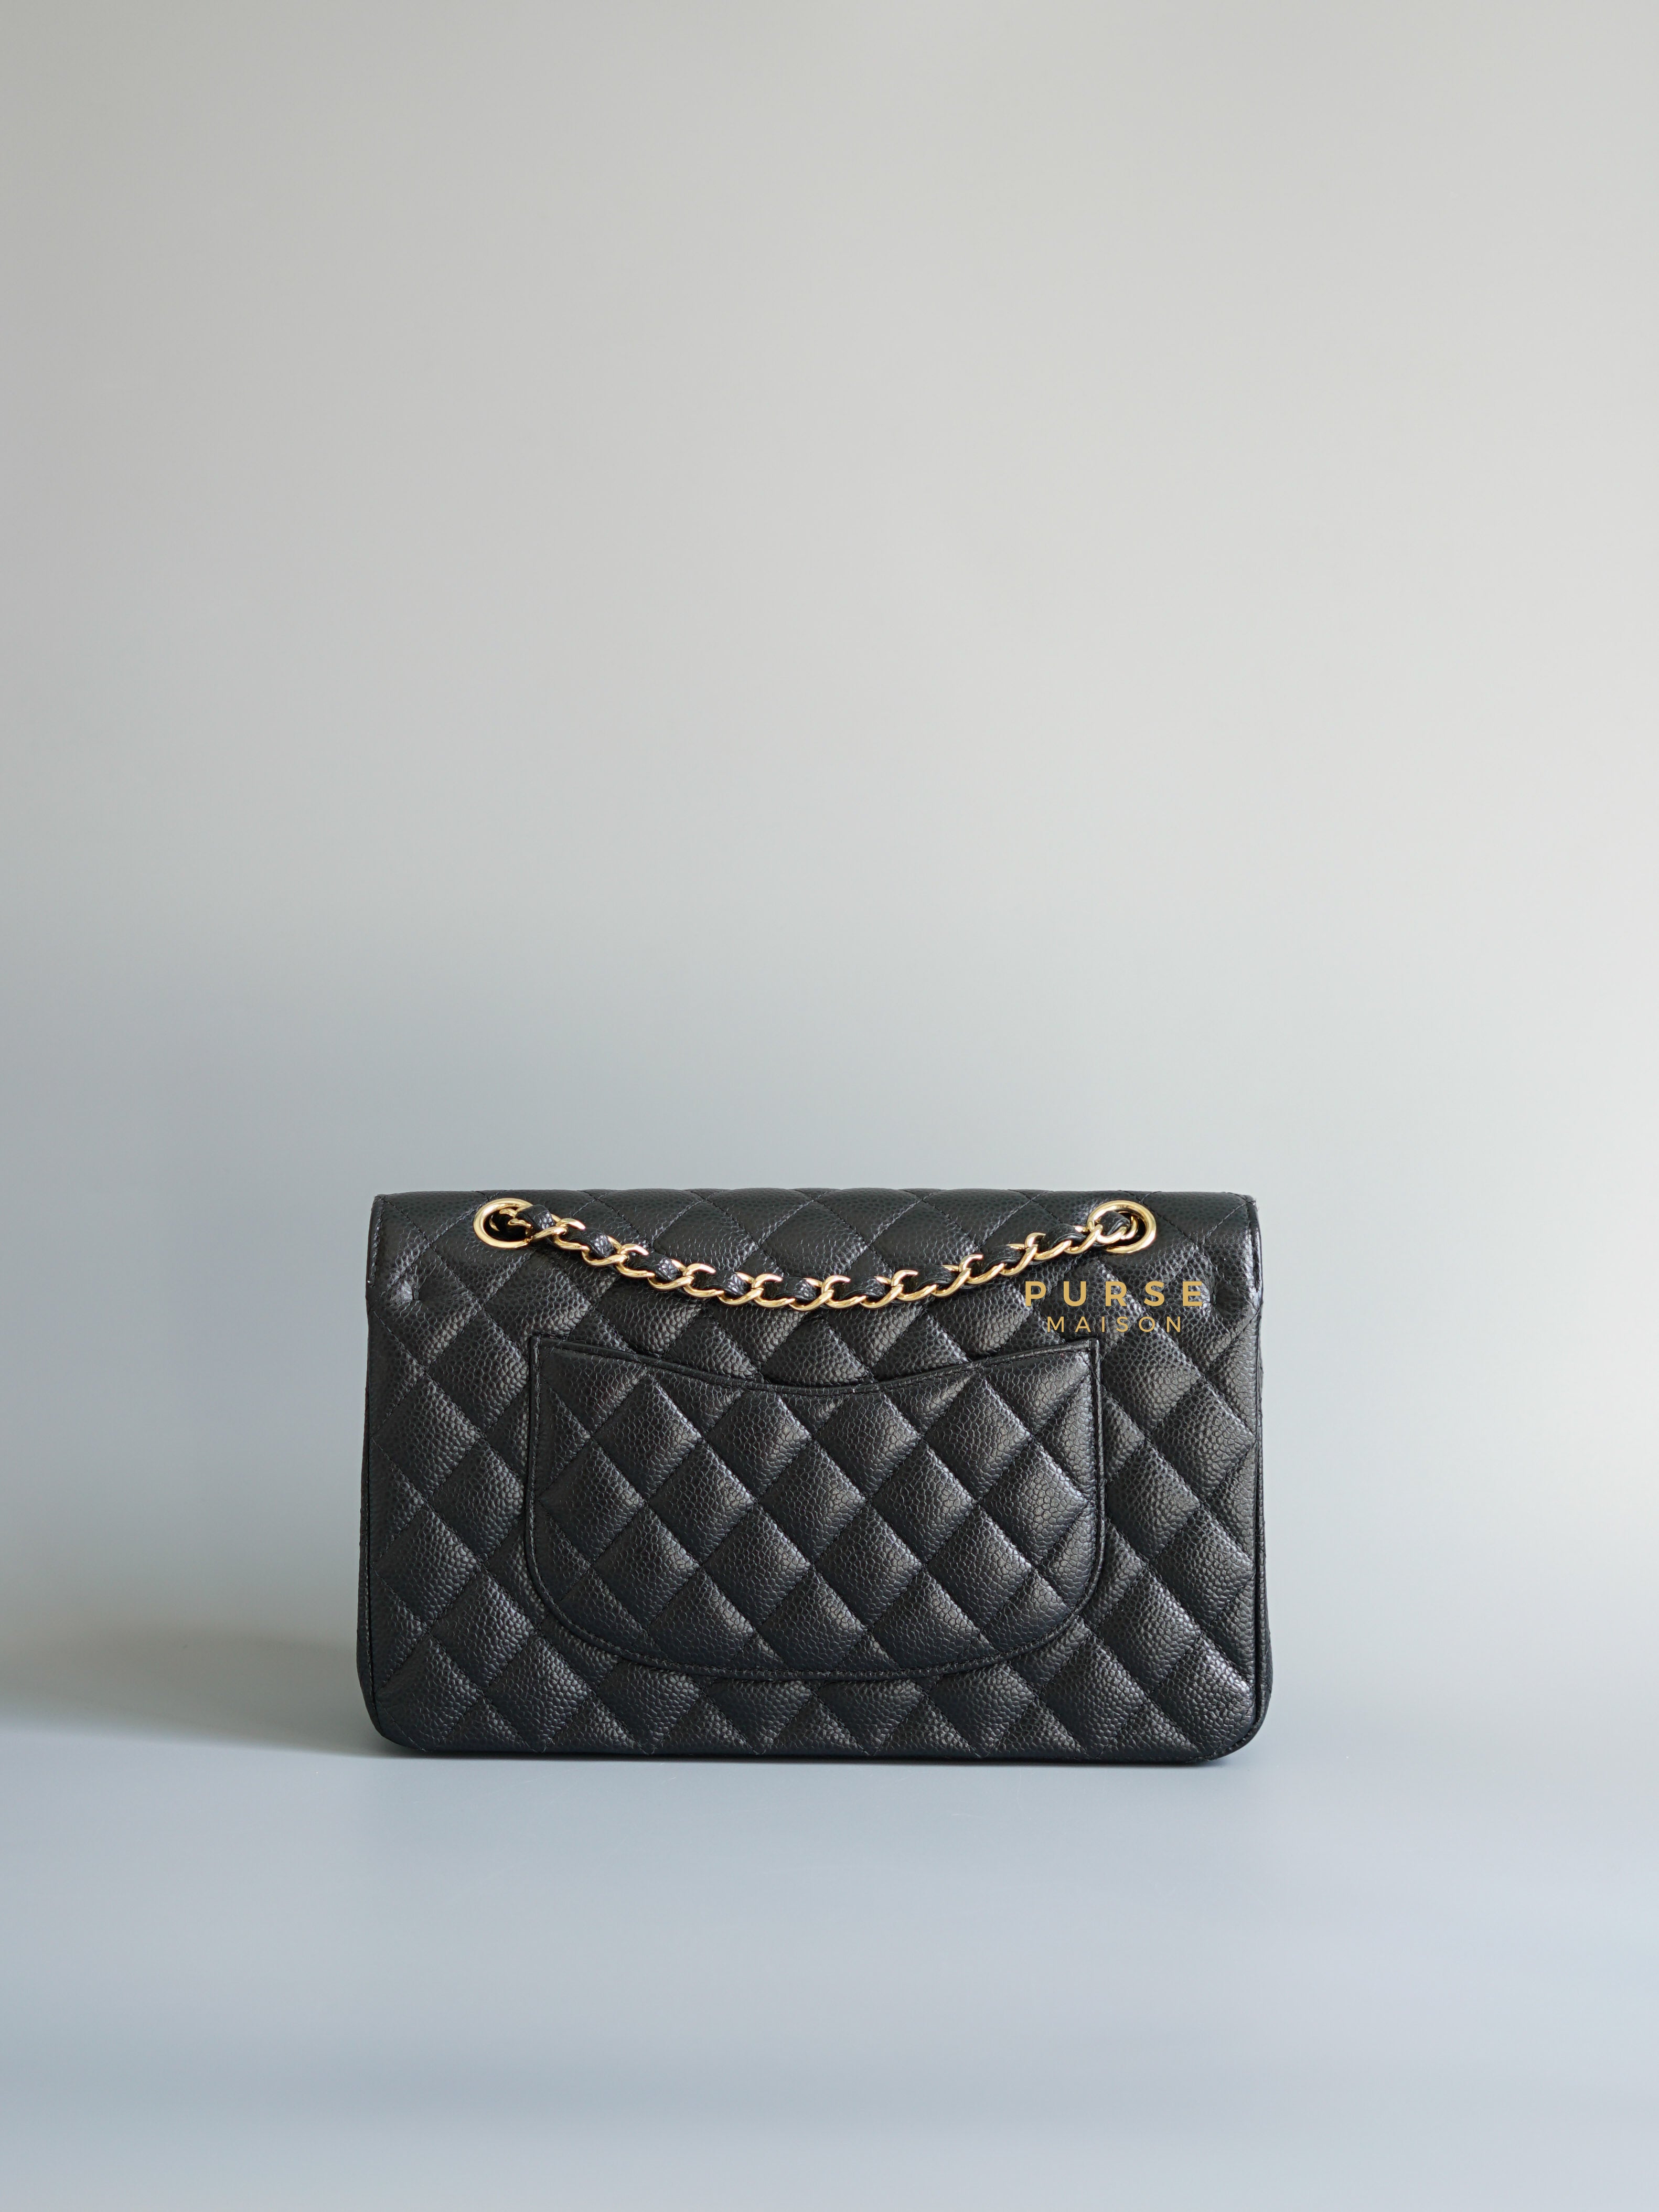 Chanel Classic Double Flap Medium Black Caviar Leather and Gold Hardware Series 21 | Purse Maison Luxury Bags Shop